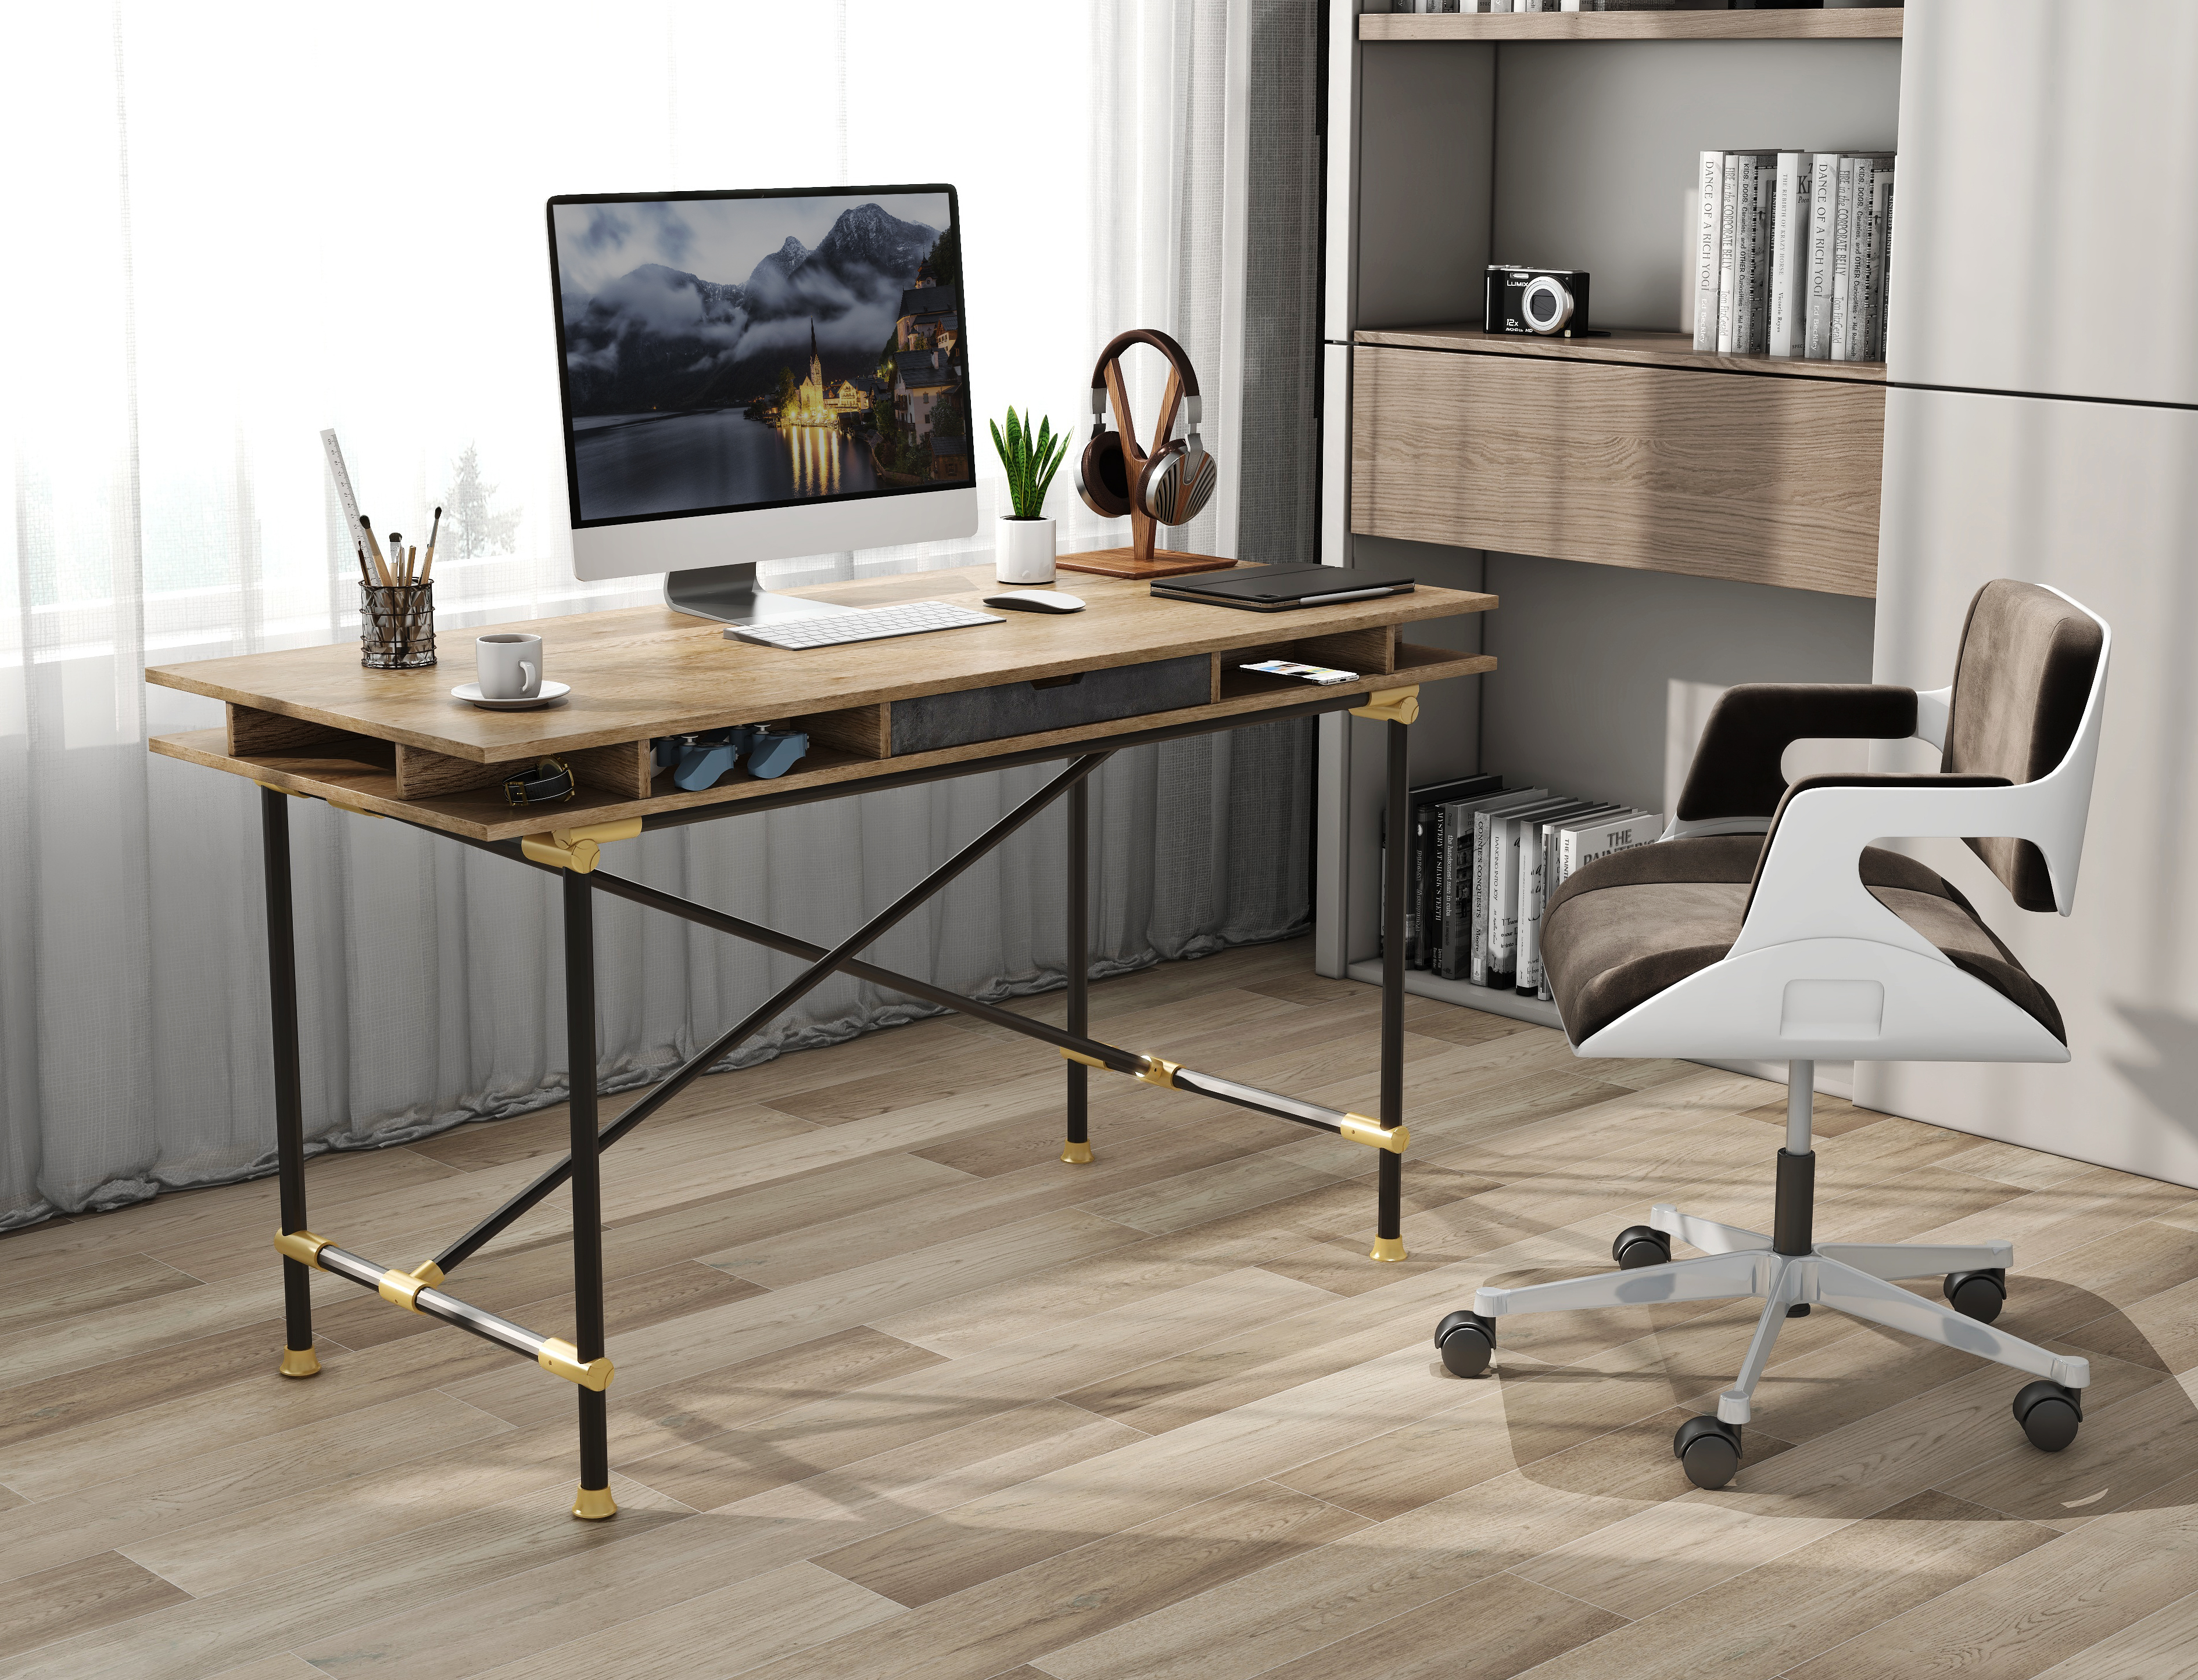 LD-06C Table Tobacco Wood Office Table fot Home Working